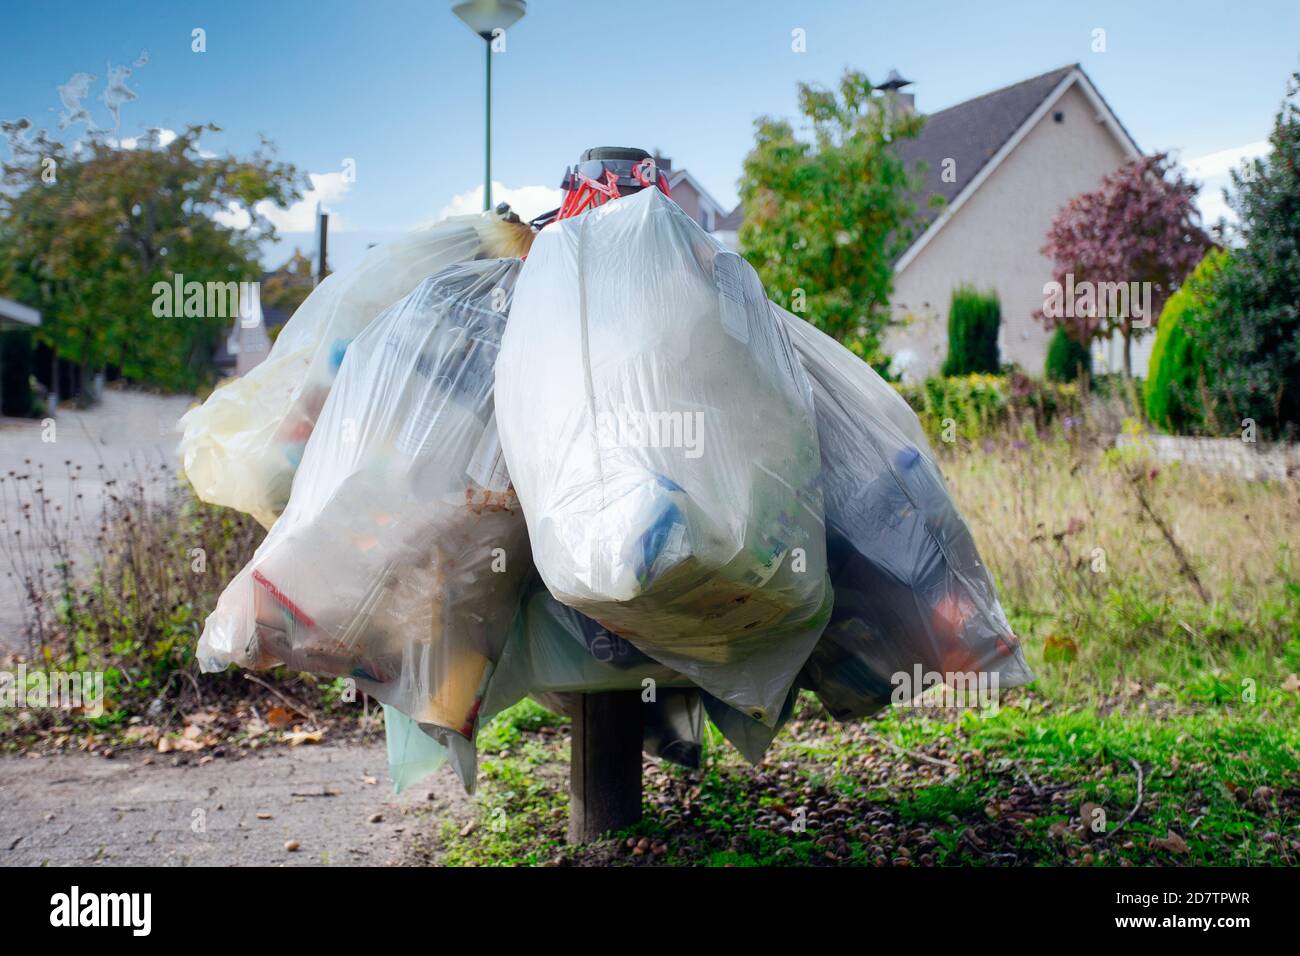 https://c8.alamy.com/comp/2D7TPWR/garbage-bag-for-plastic-hanging-in-the-street-for-pick-up-garbage-collector-waiting-to-destroy-recycle-and-environment-concept-2D7TPWR.jpg